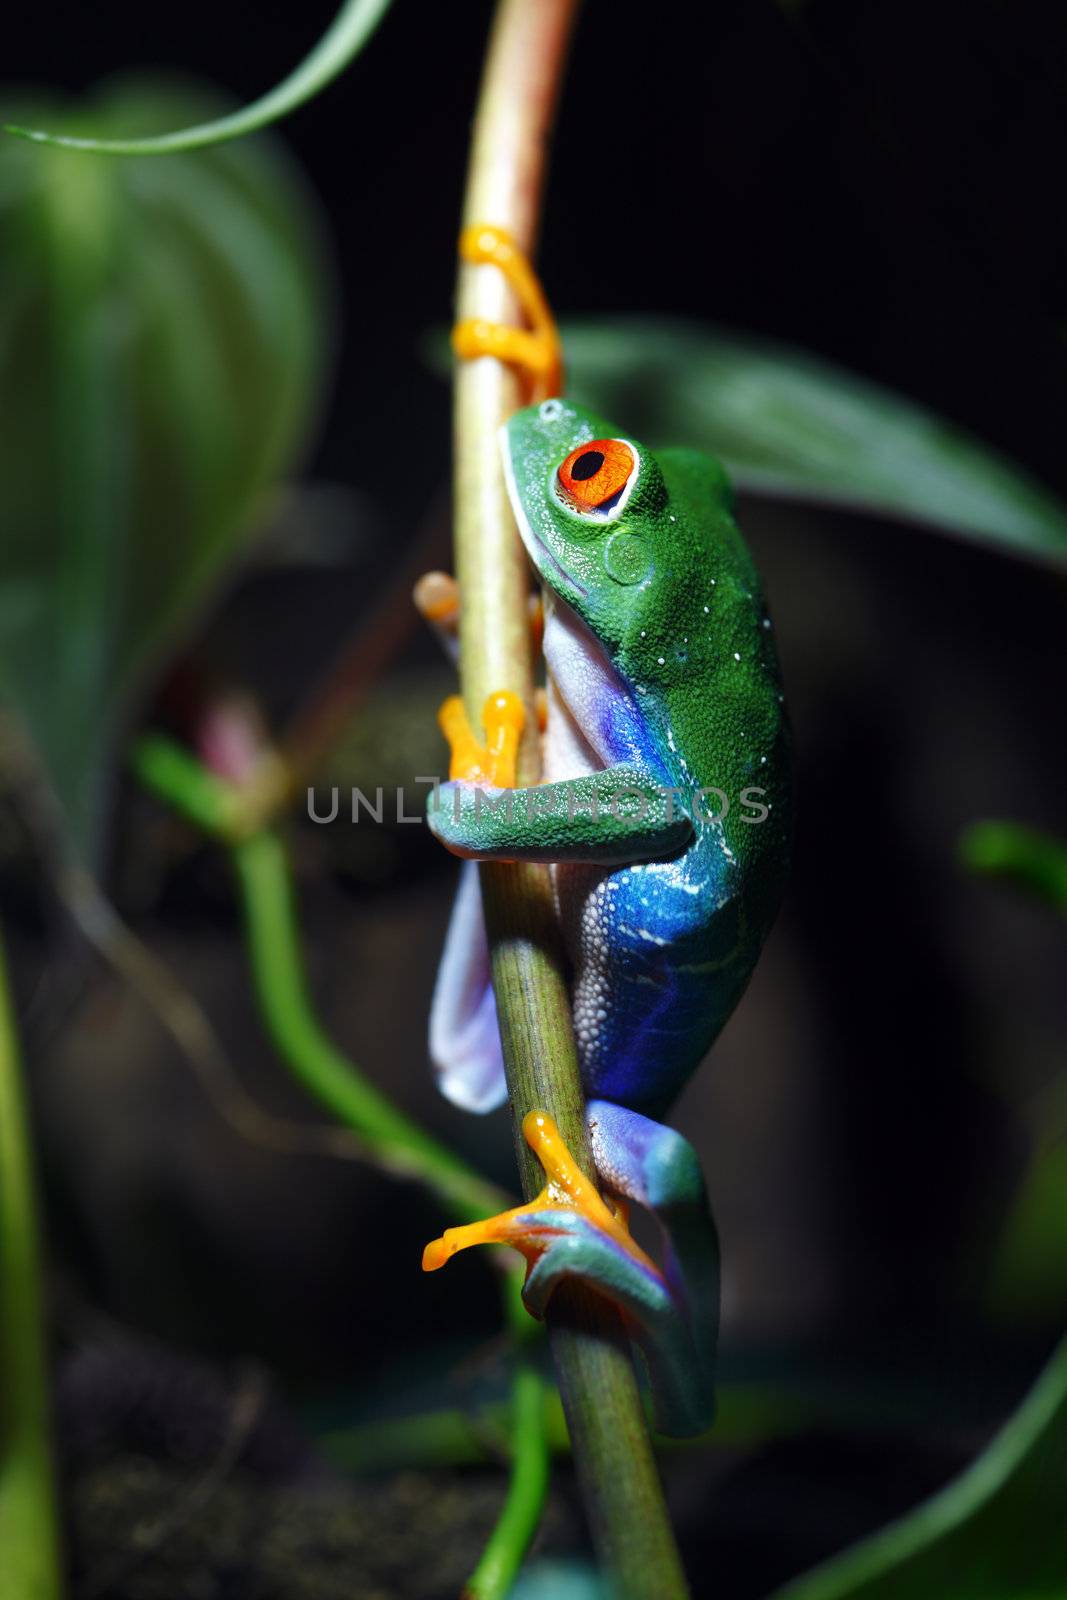 A macro shot of a colorful Red-Eyed Tree Frog (Agalychnis callidryas) climbing a vine in its tropical setting.